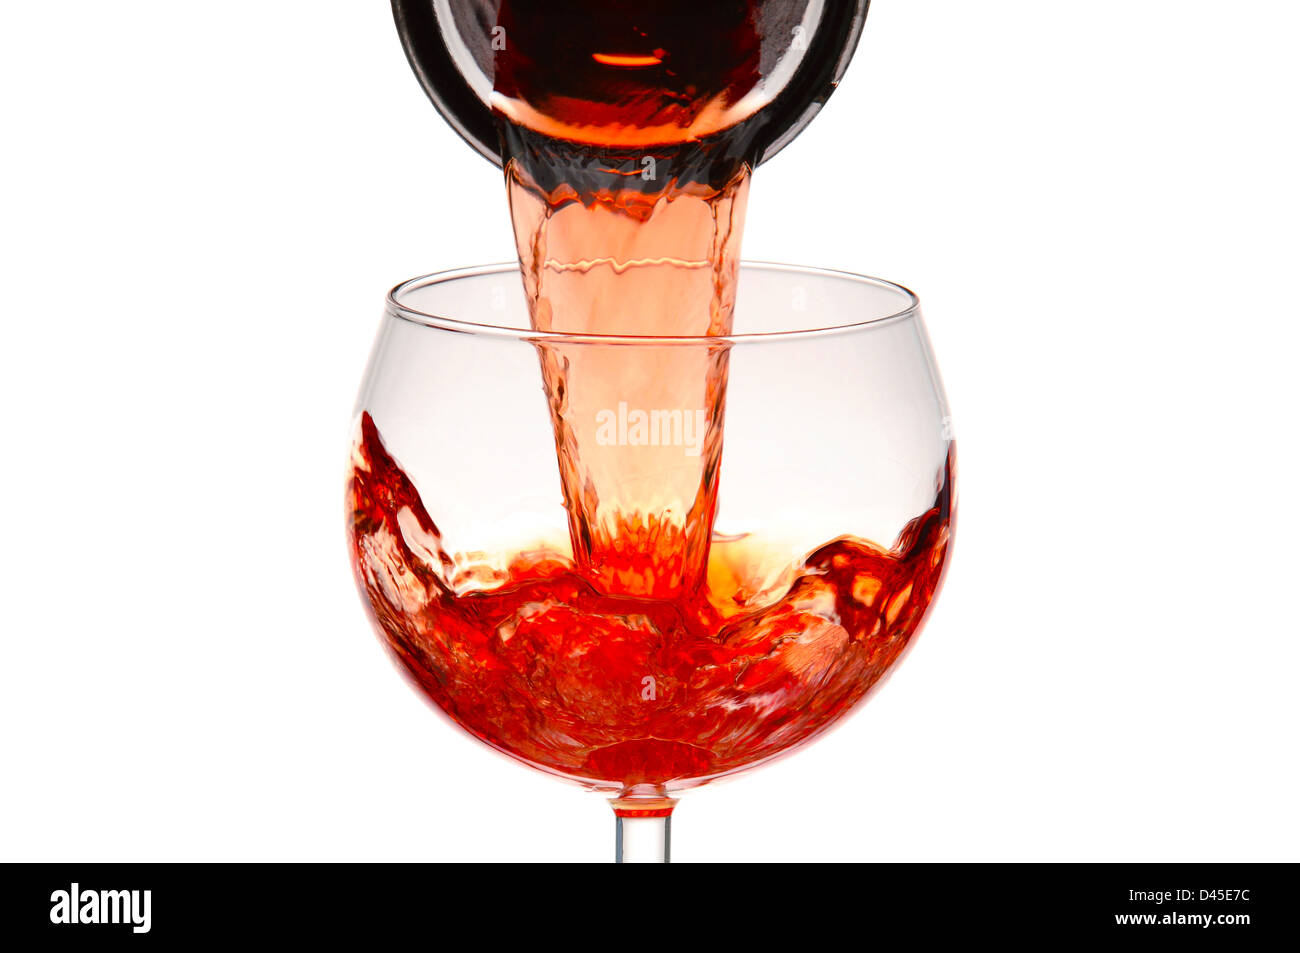 Closeup of a wineglass with red wine pouring from a carafe. Stock Photo